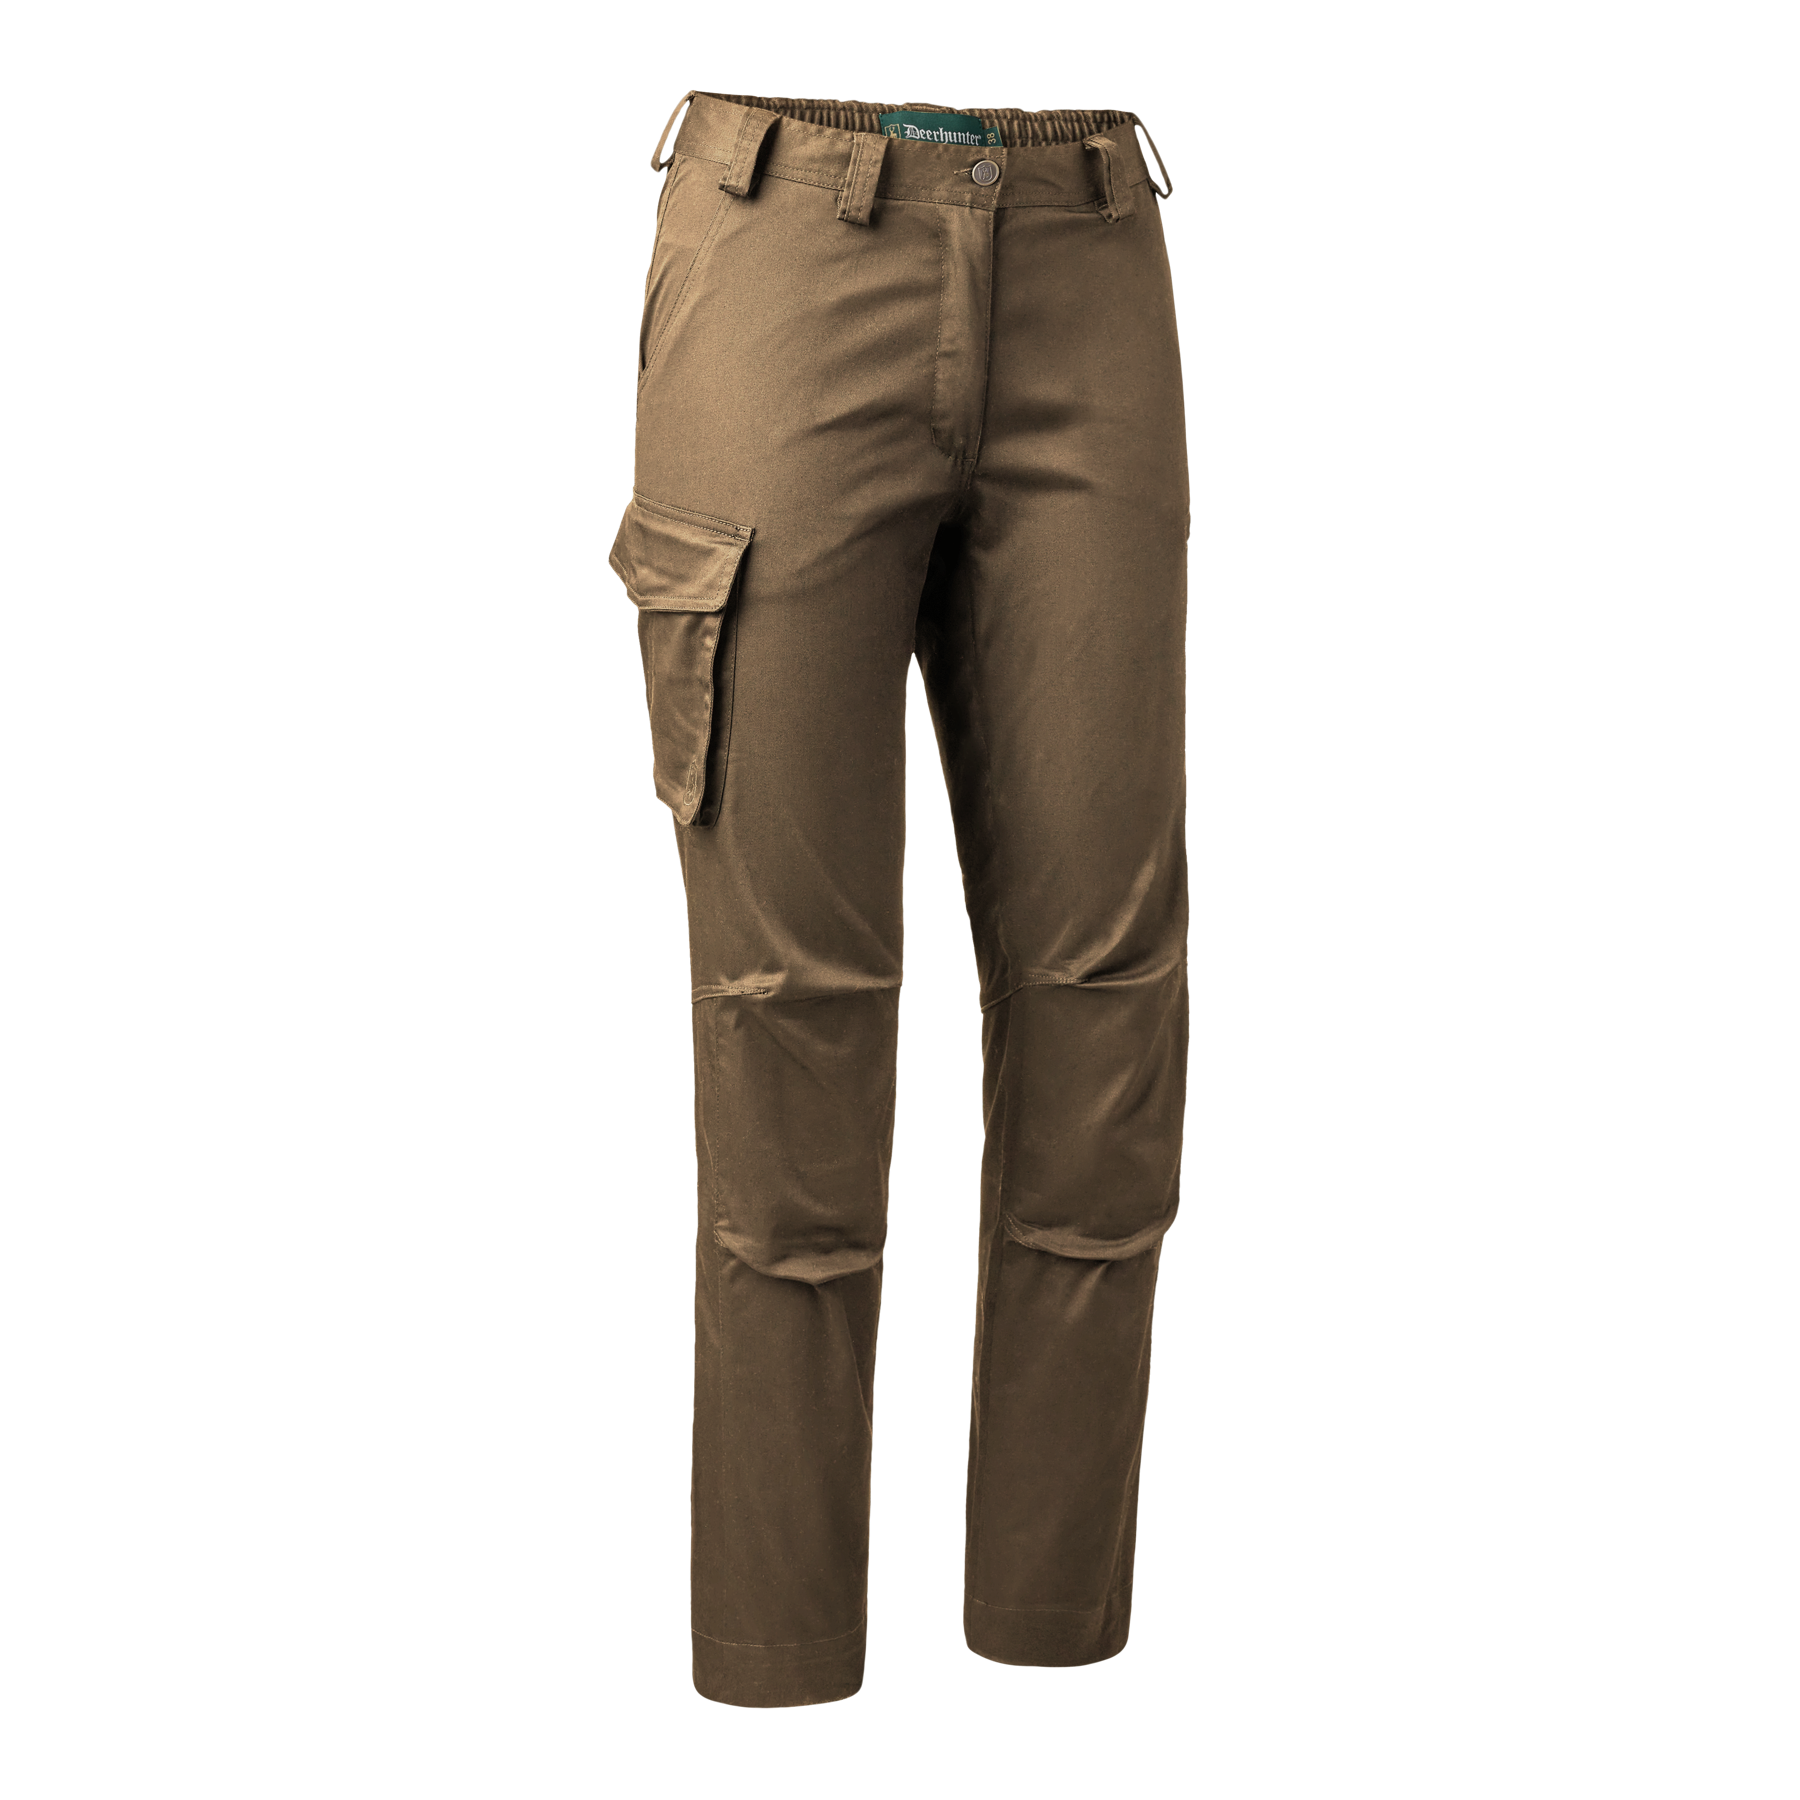 Lady Traveler Trousers